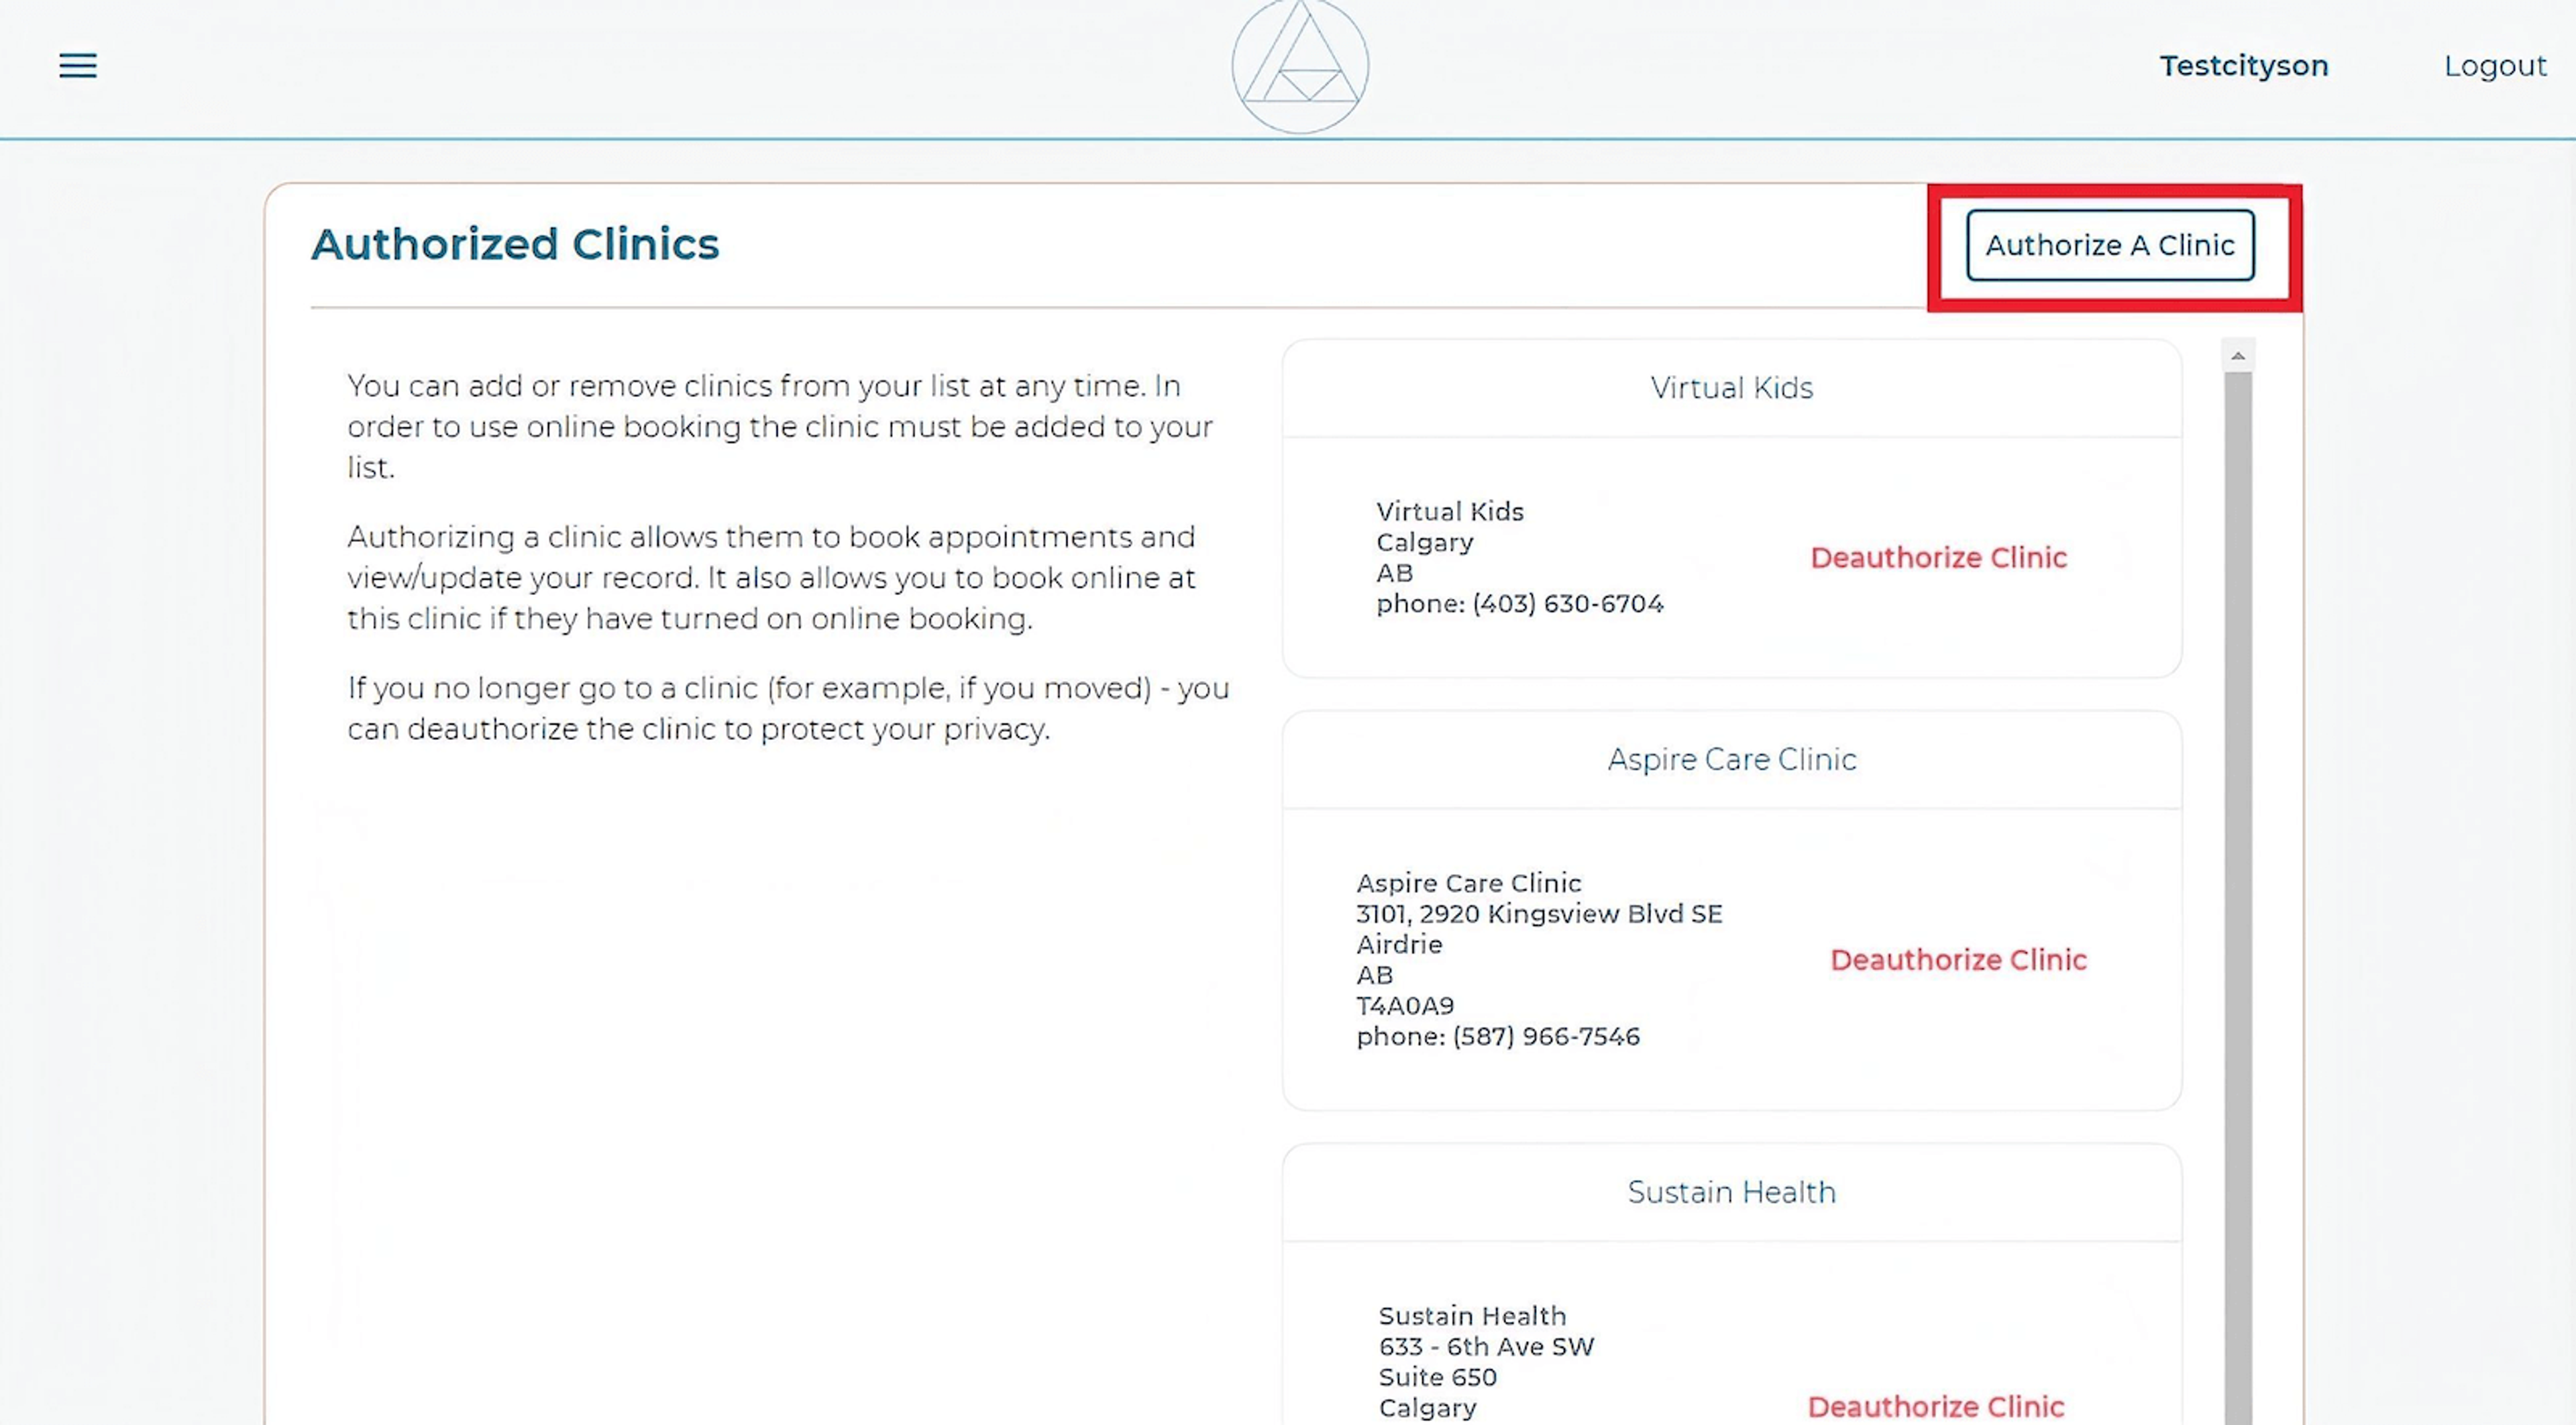 Authorized Clinics workspace with 'Authorize a Clinic' button highlighted in red